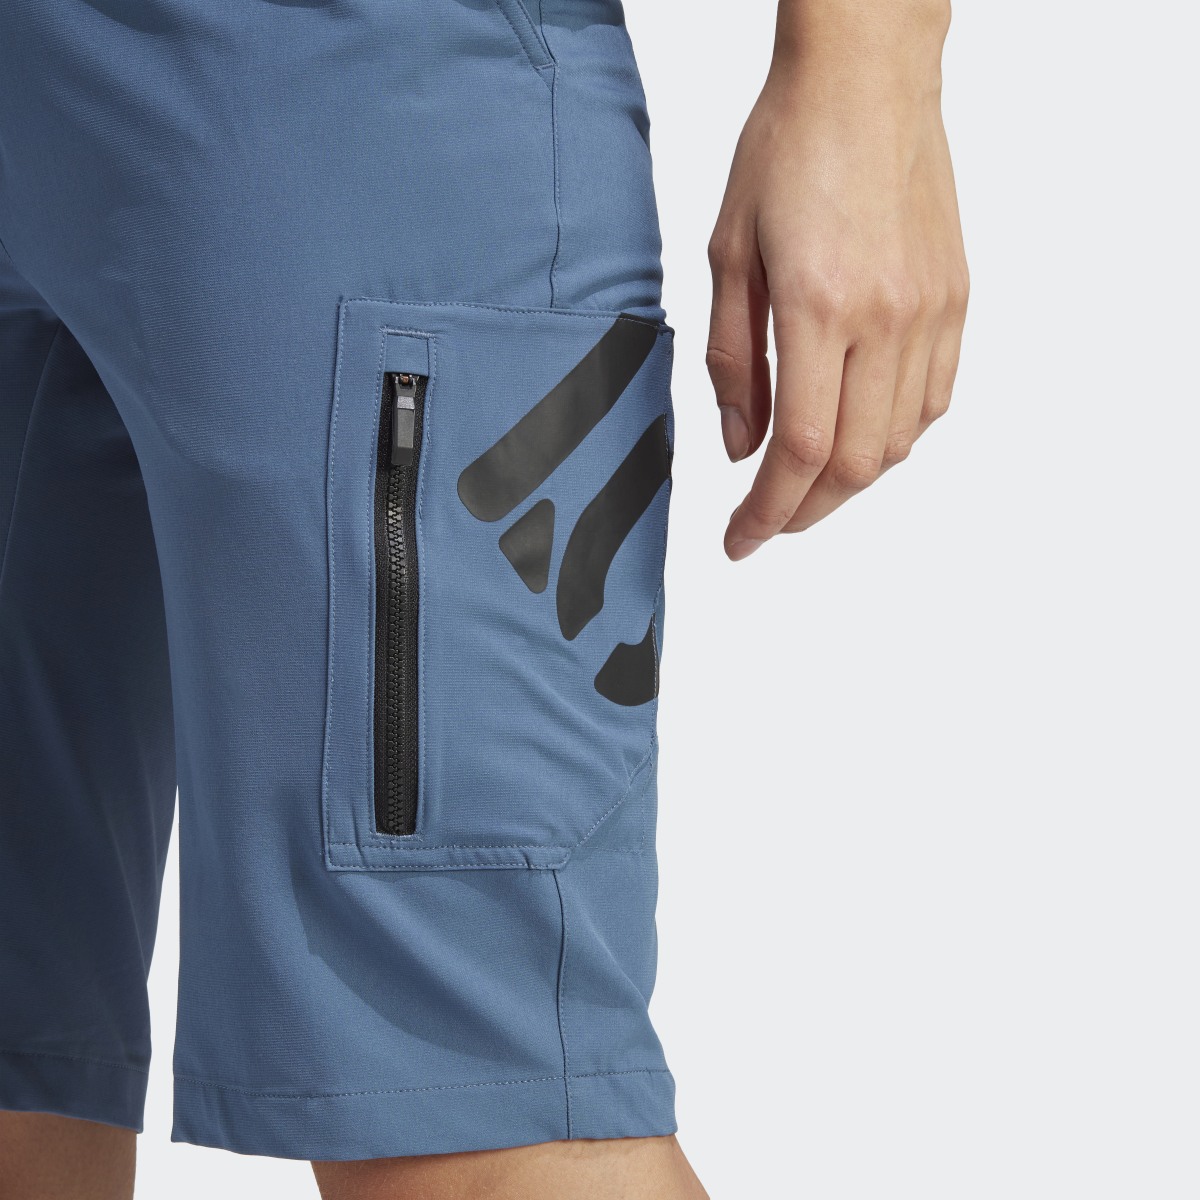 Adidas Five Ten Brand of the Brave Shorts. 7